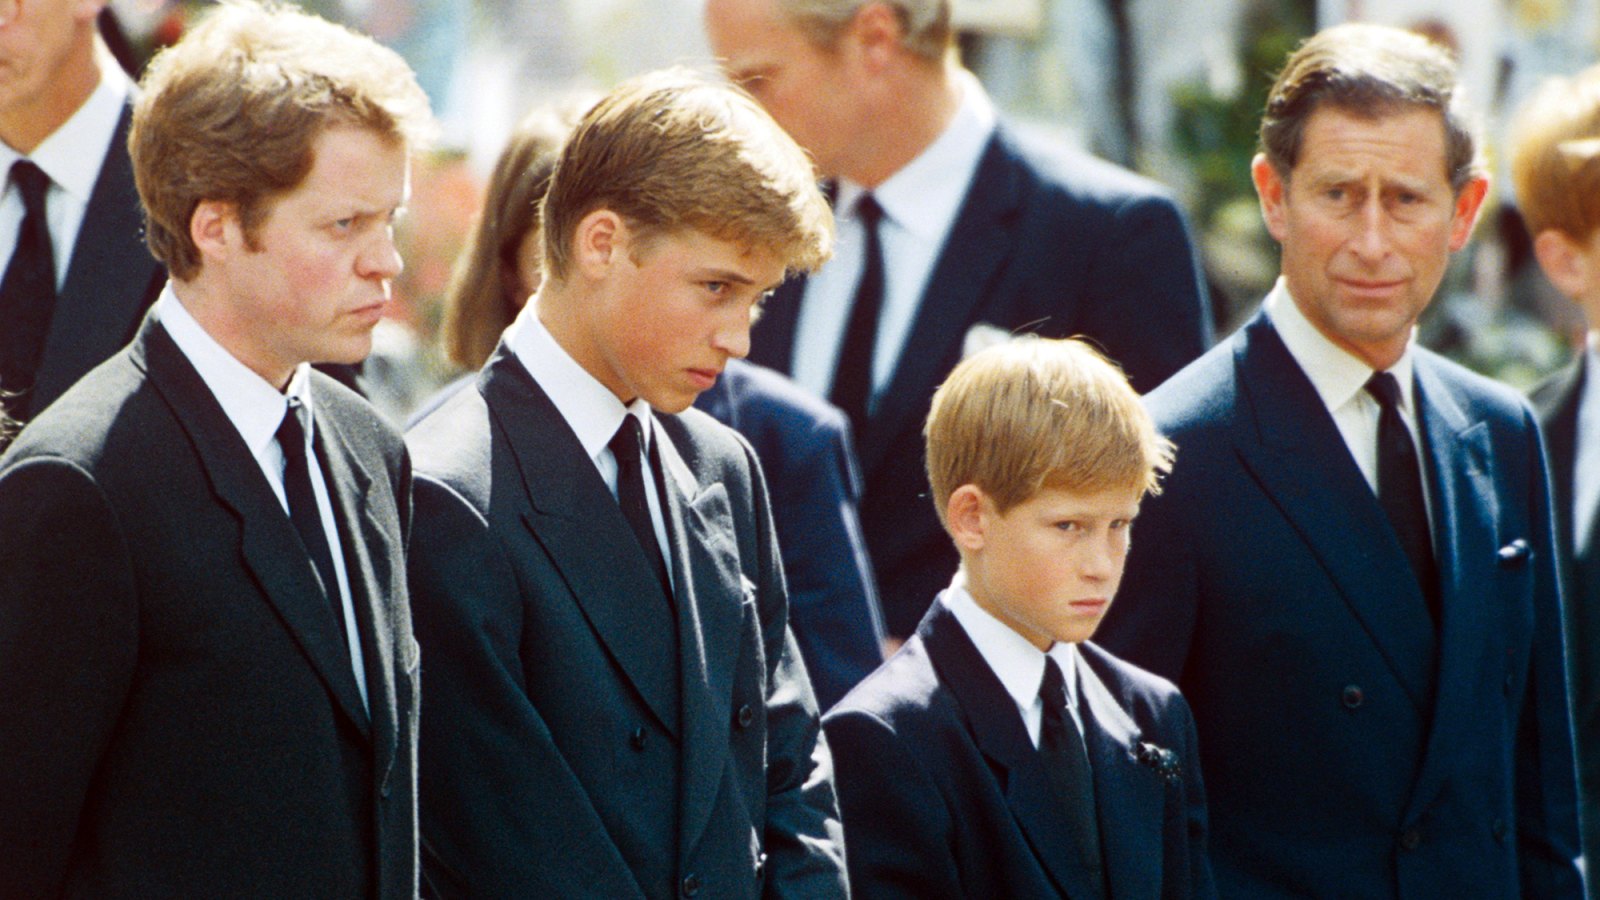 Prince Harry Says He and Prince William 'Were Unable' to Show Emotion After Princess Diana's Death: I Only 'Cried Once'